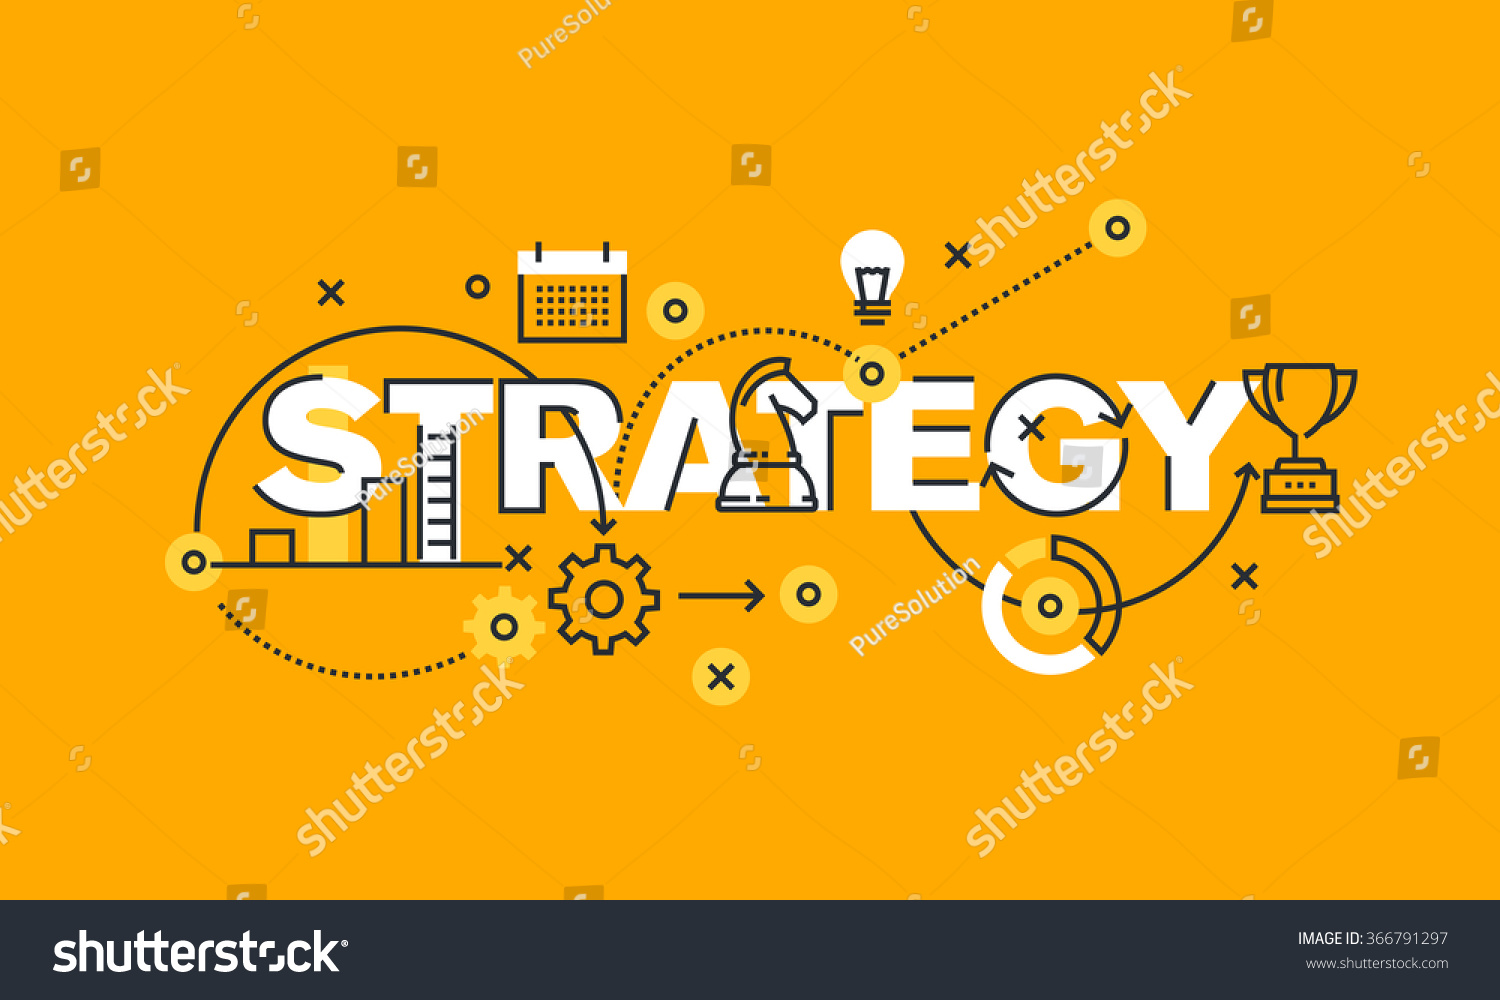 Thin line flat design banner of business and marketing strategy.  Modern vector illustration concept of word strategy for website and mobile website banners, easy to edit, customize and resize. #366791297